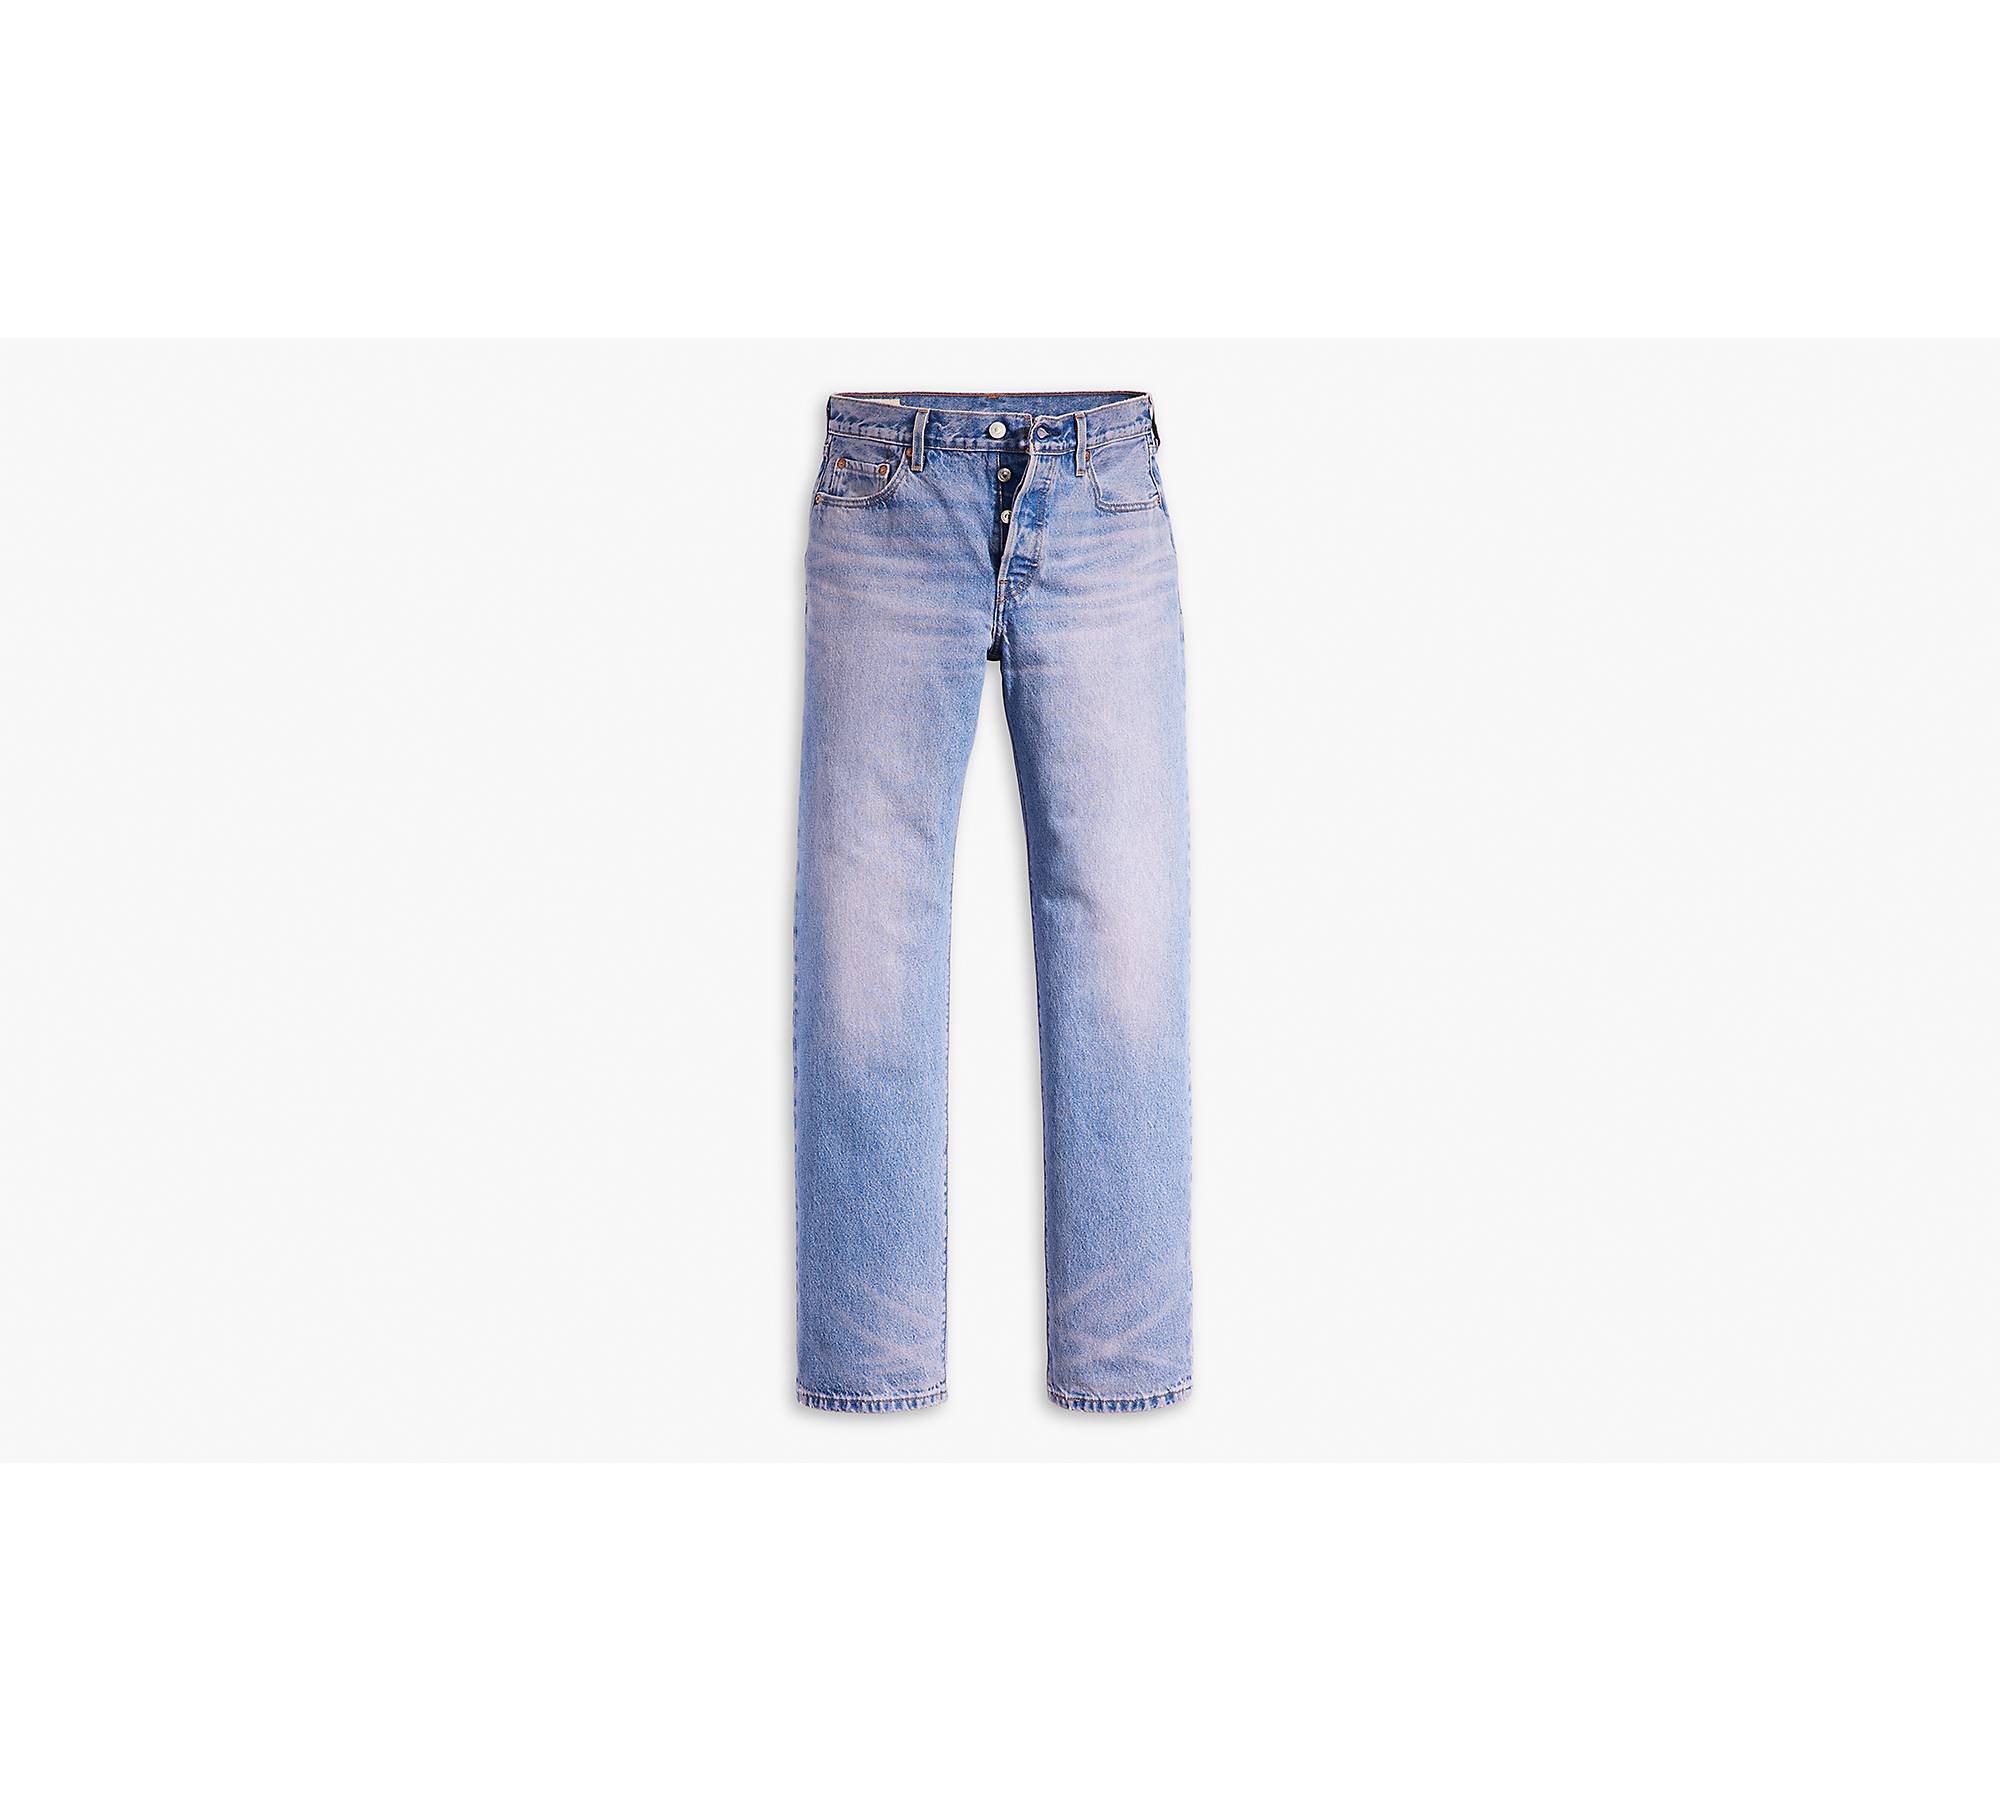 Levi's 501 90's Jean Light Indigo Worn In A1959-0011 - Free Shipping at  Largo Drive